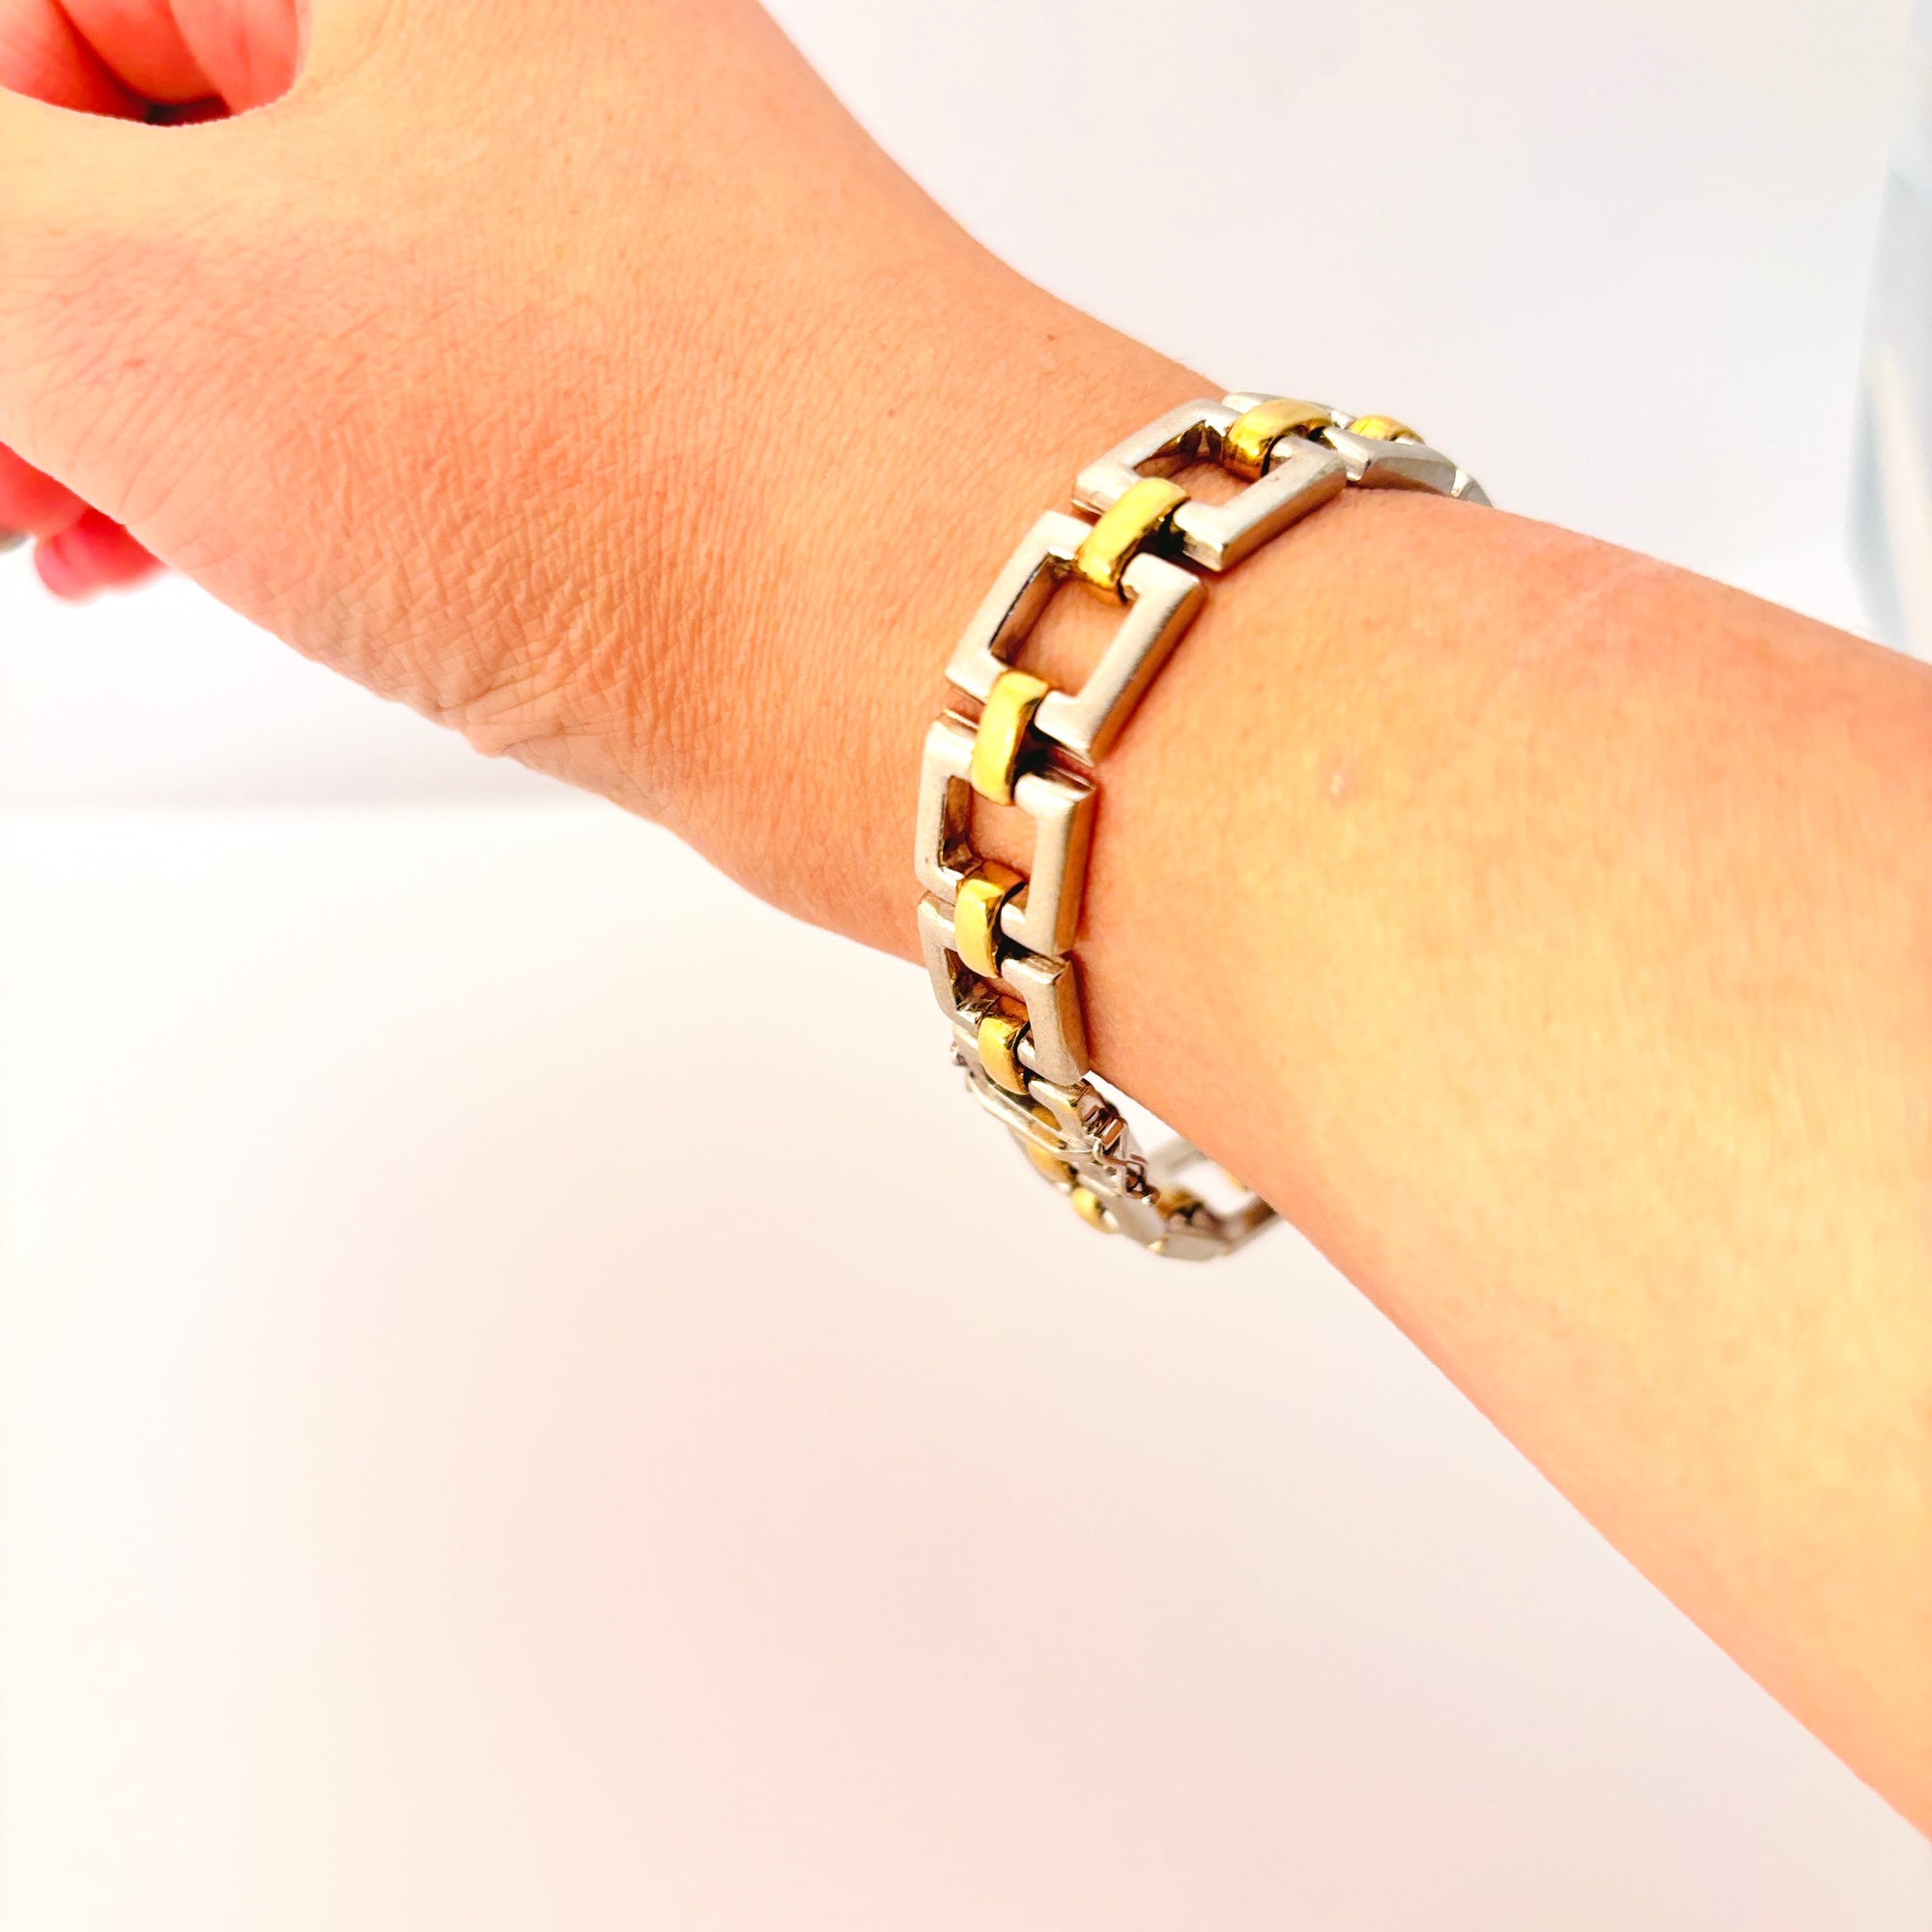 18k Yellow and White Gold Bracelet  | 8.75